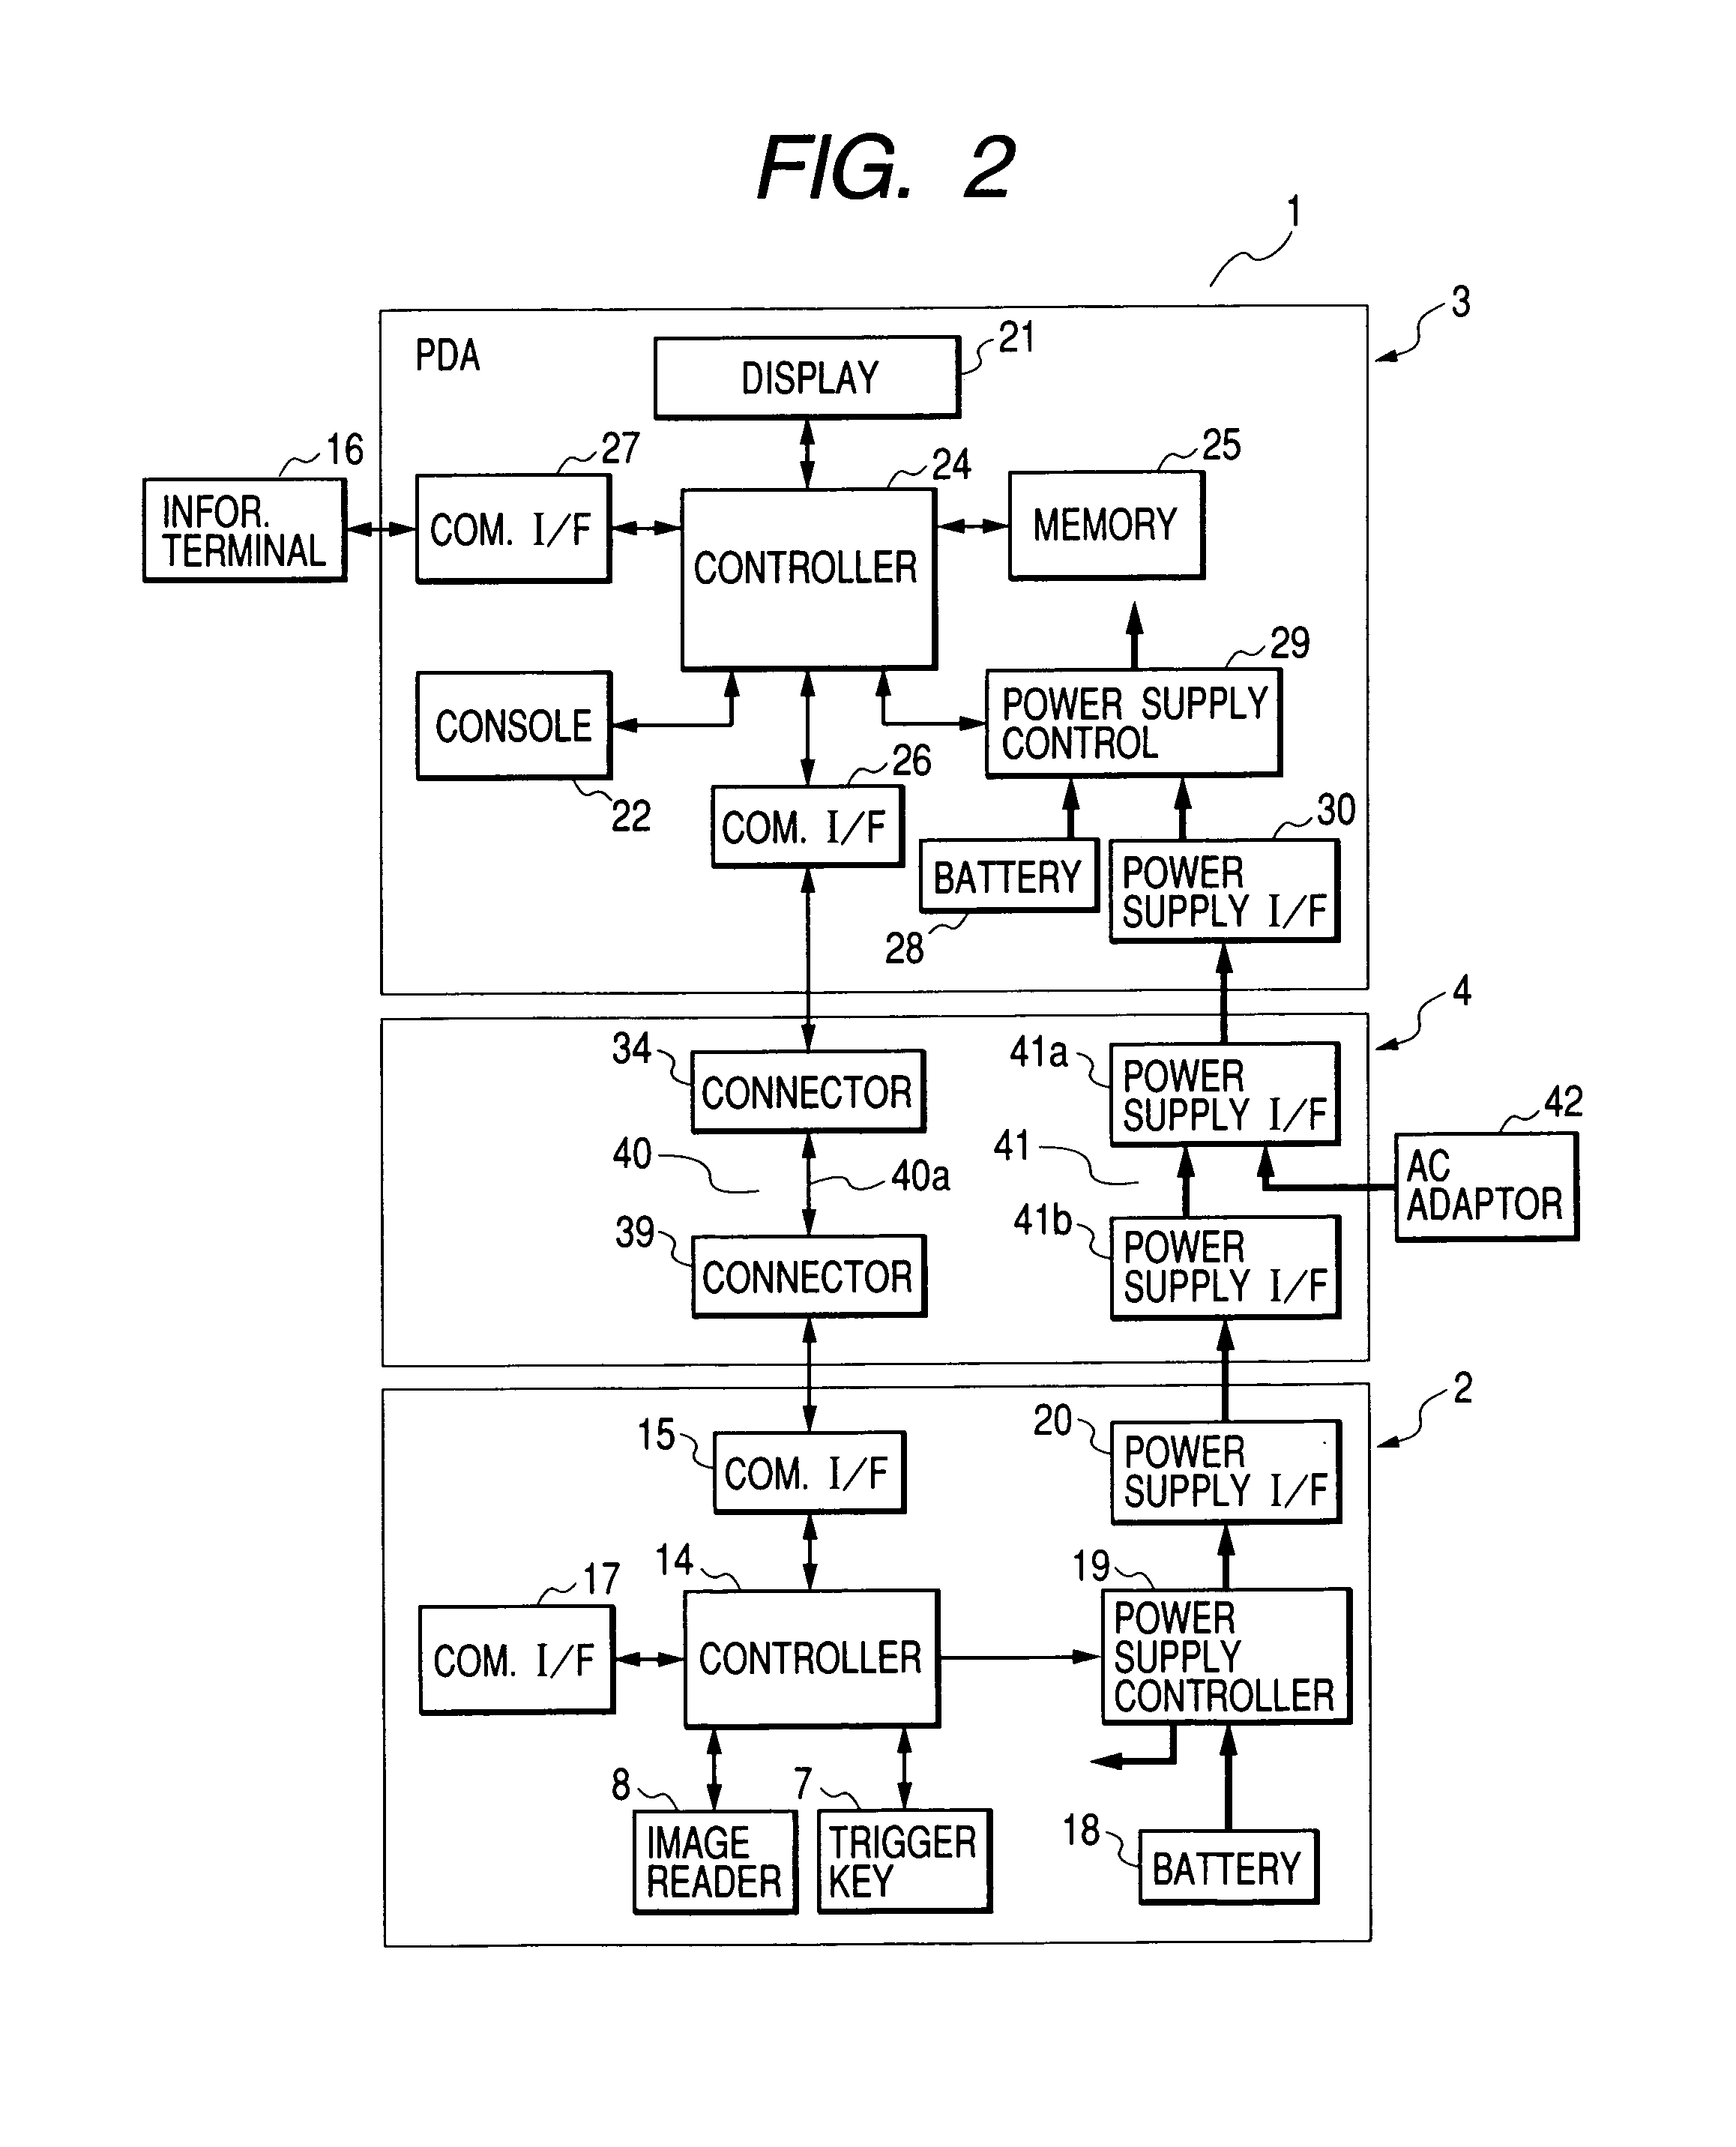 Inexpensive and easy-to-handle structure of optical information reading apparatus